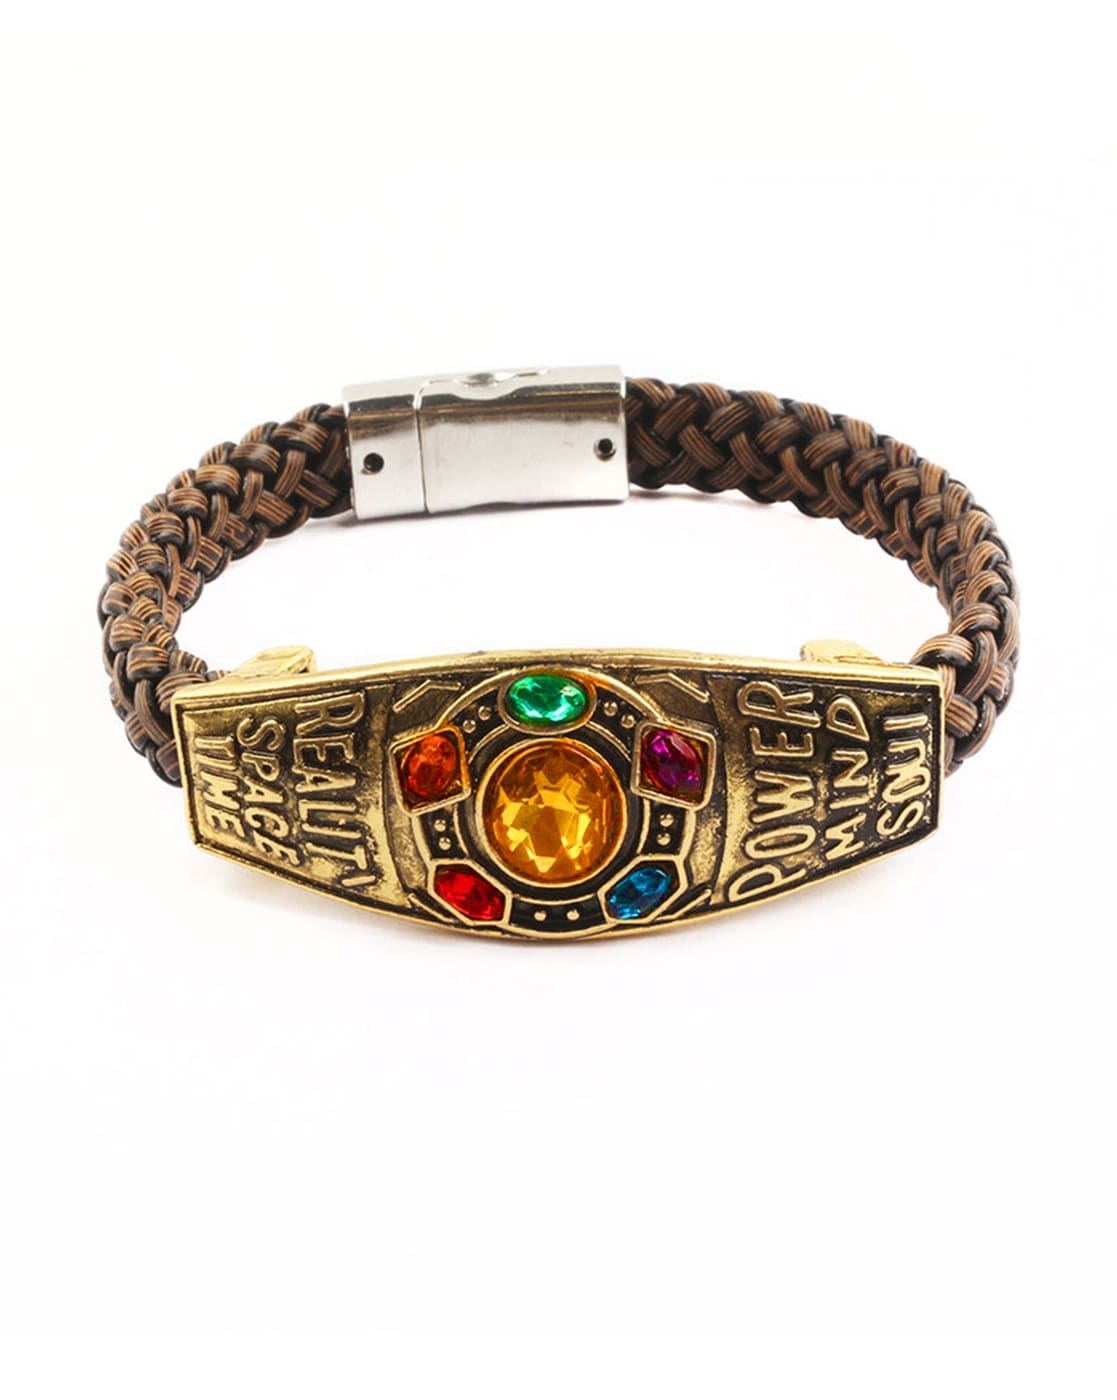 Brie Larson's Irene Neuwirth bracelet and rings at the world premiere of Avengers  Endgame | Marvel jewelry, Amazing jewelry, Jewelry